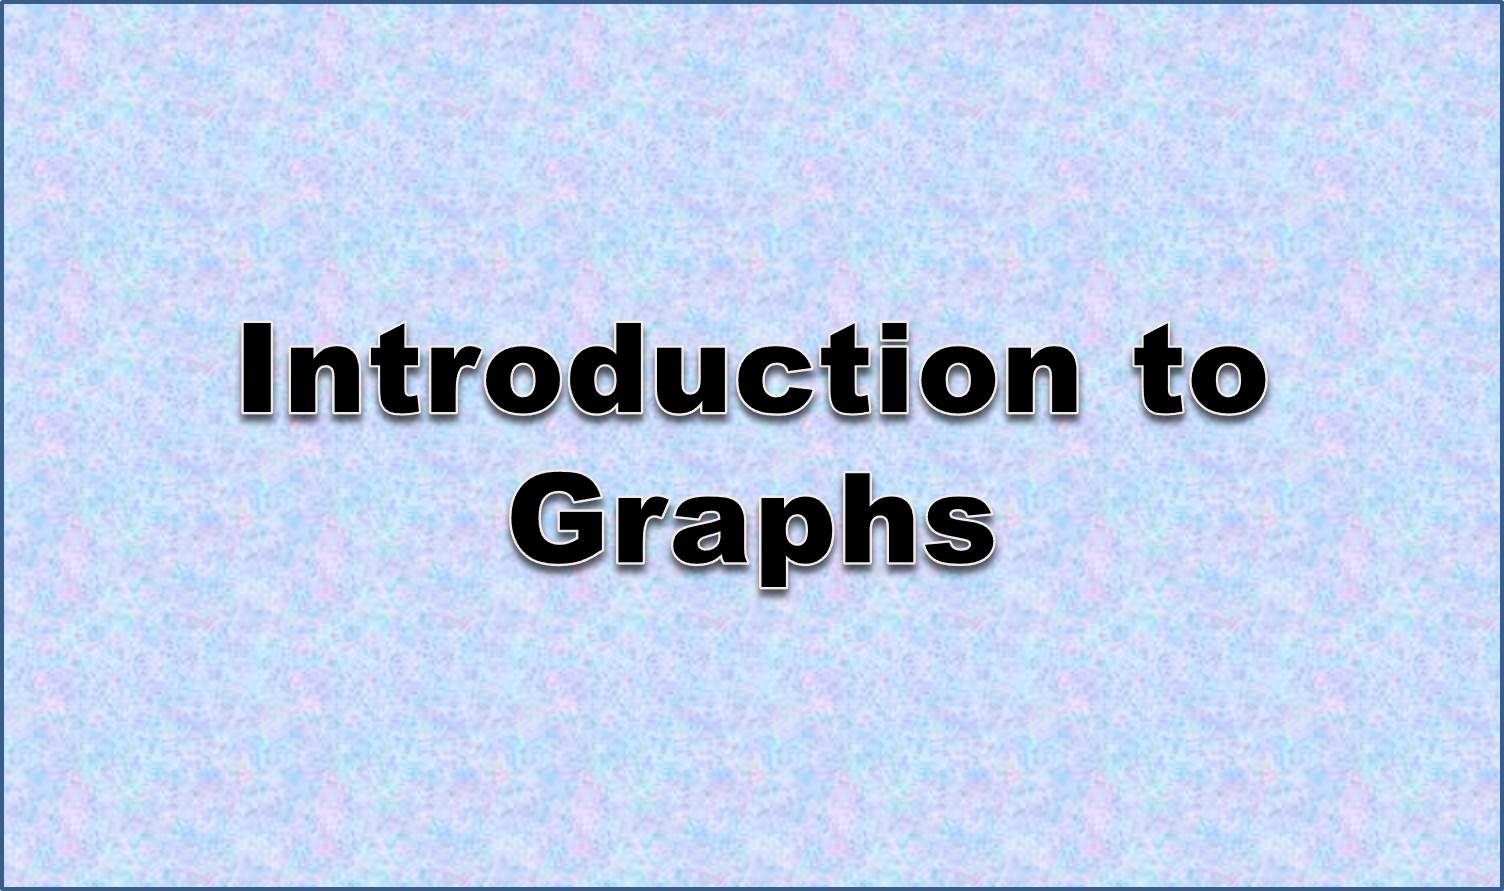 http://study.aisectonline.com/images/Coordinate plane-graphing points.jpg